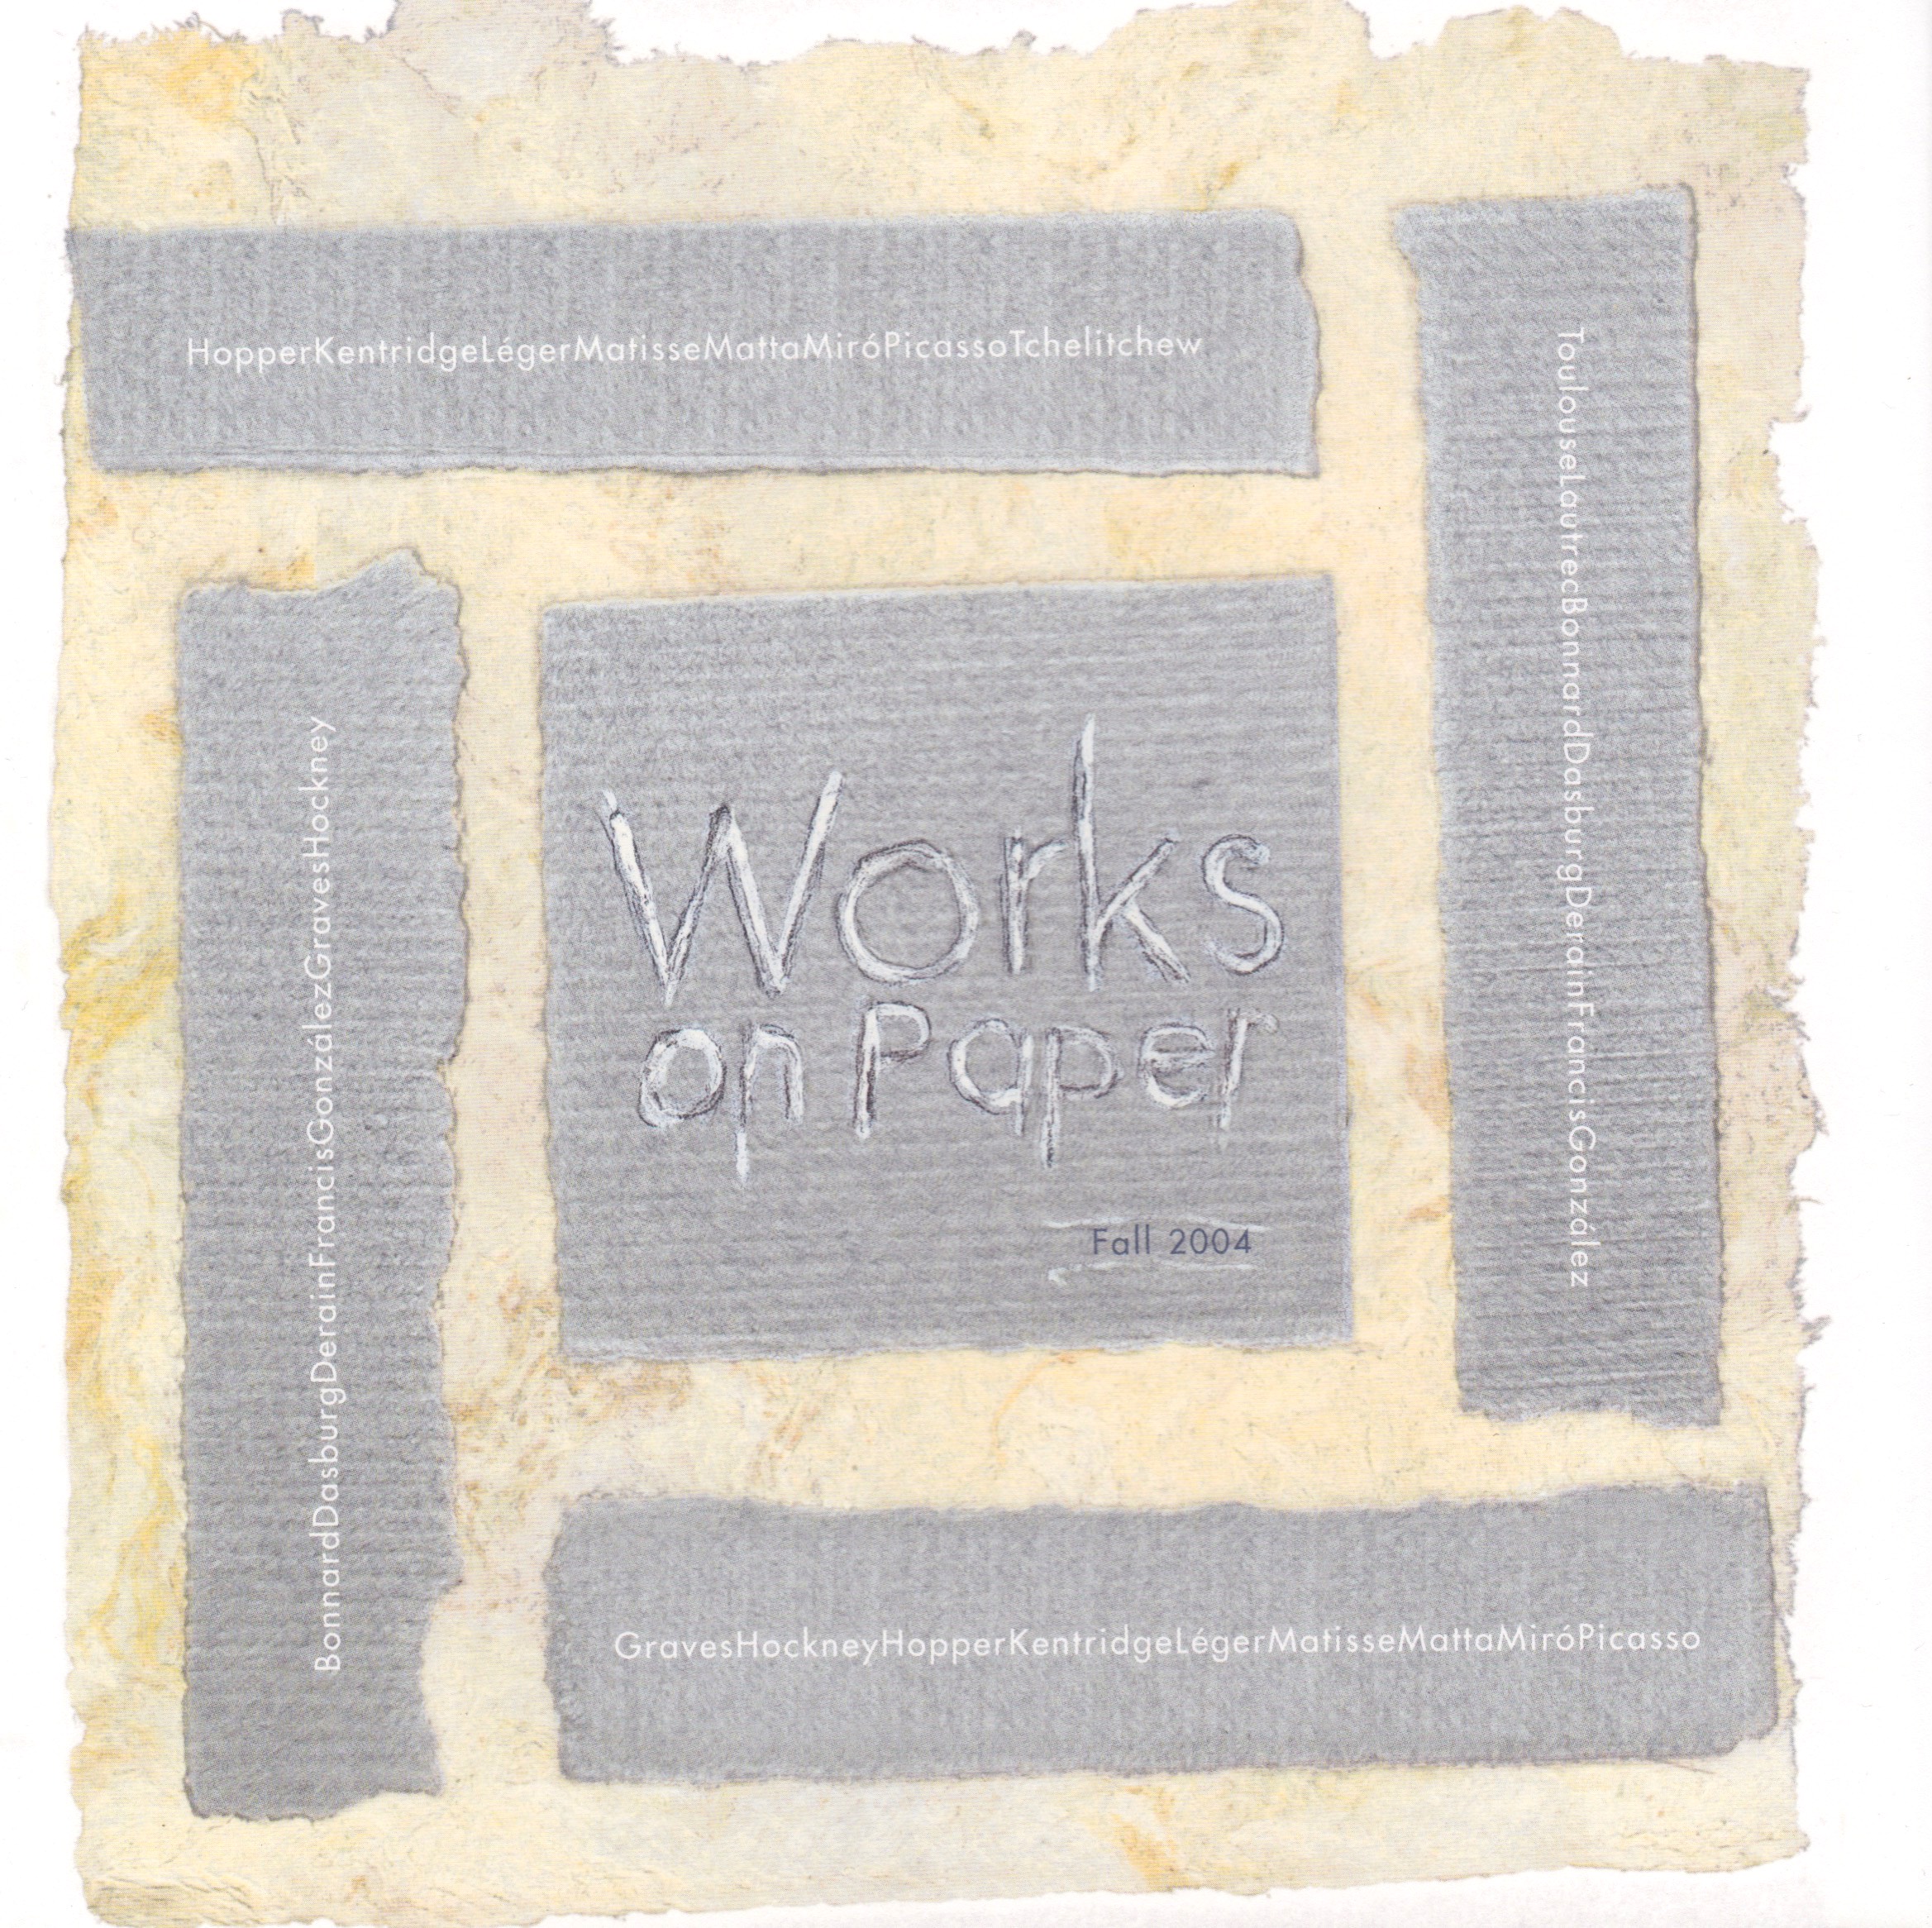 Works on Paper (2004)